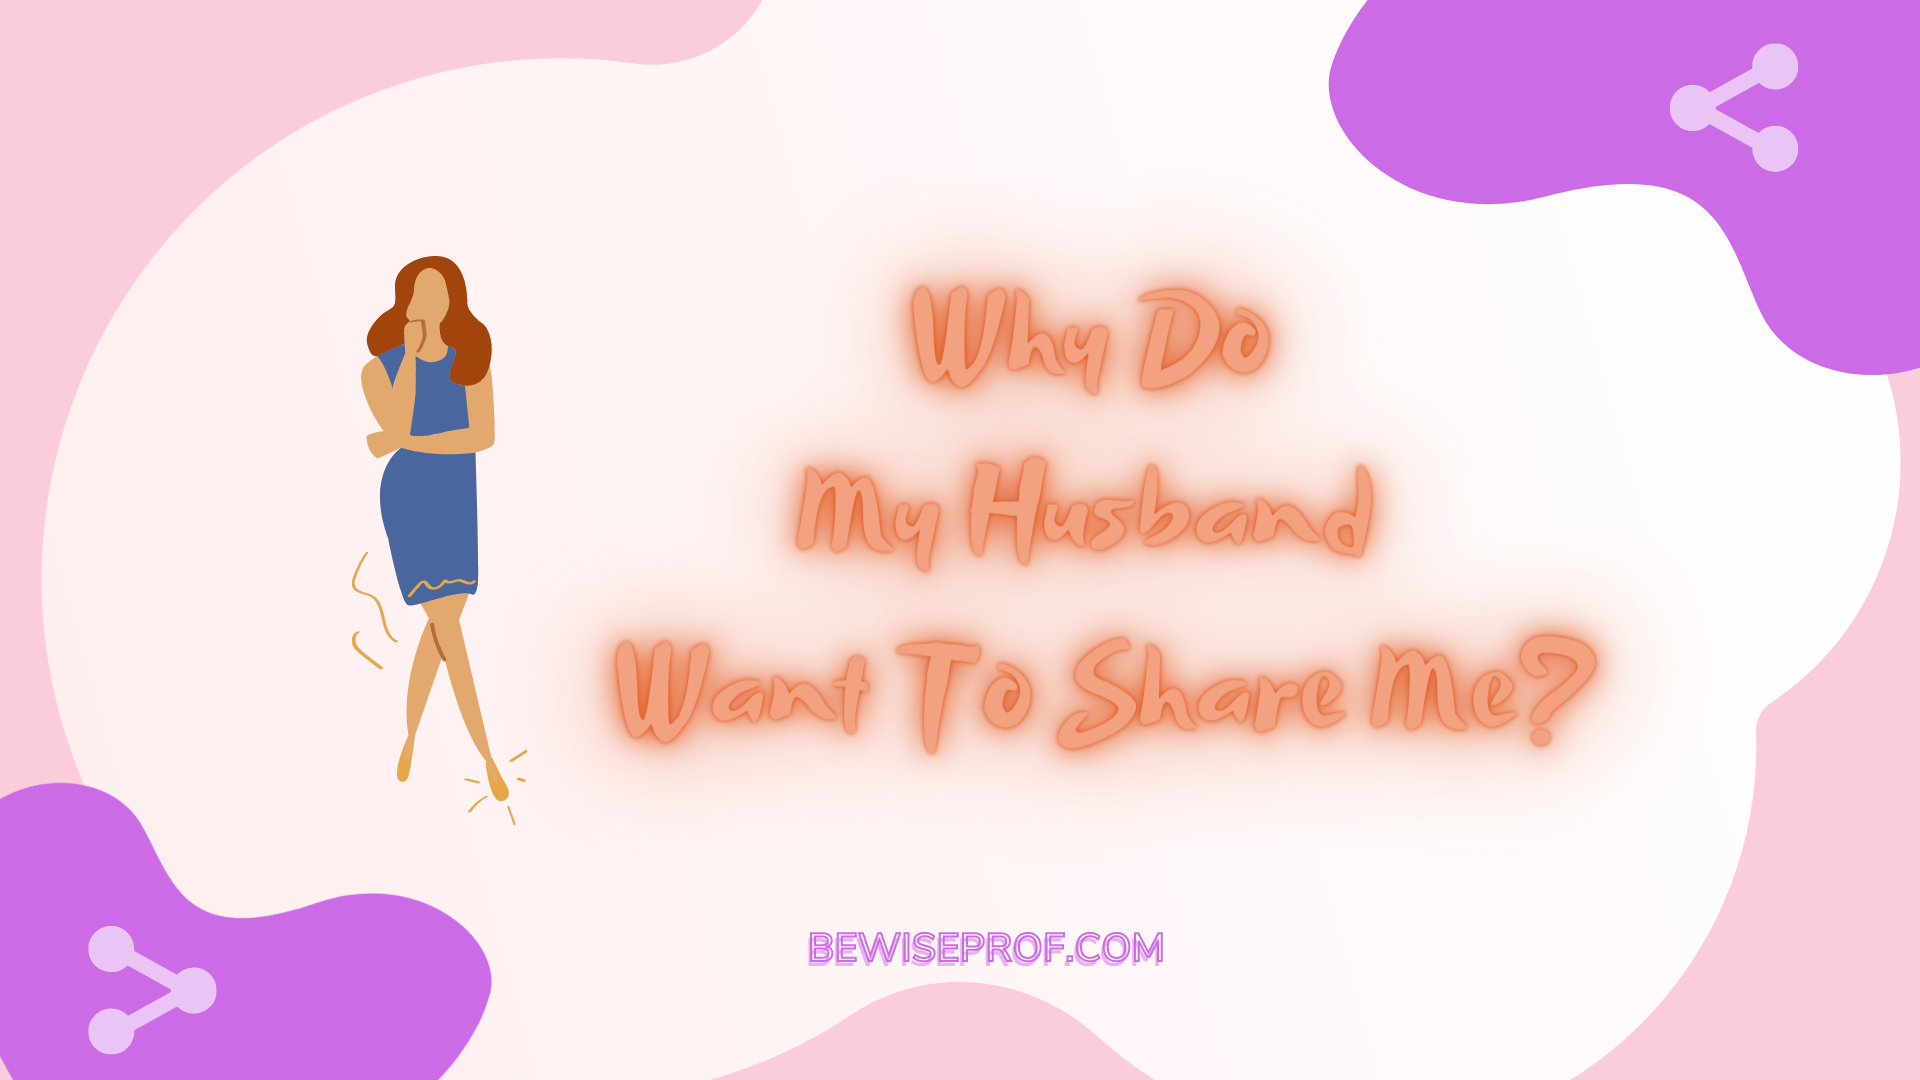 Why Do My Husband Want To Share Me?